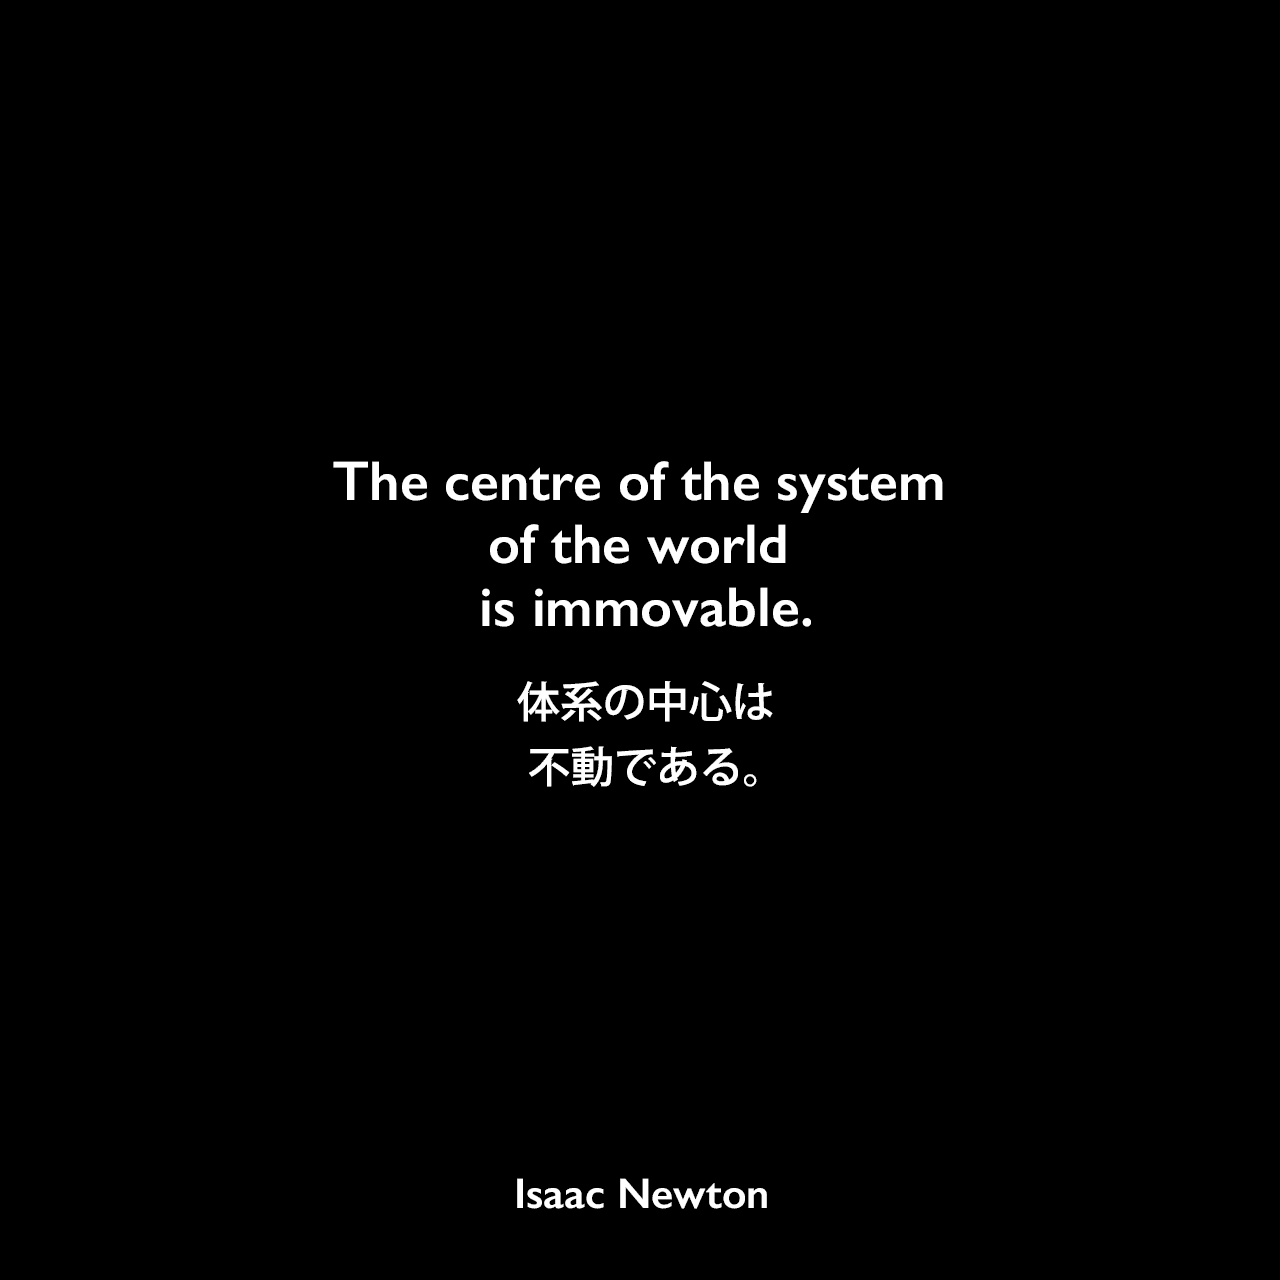 The centre of the system of the world is immovable.体系の中心は不動である。Isaac Newton